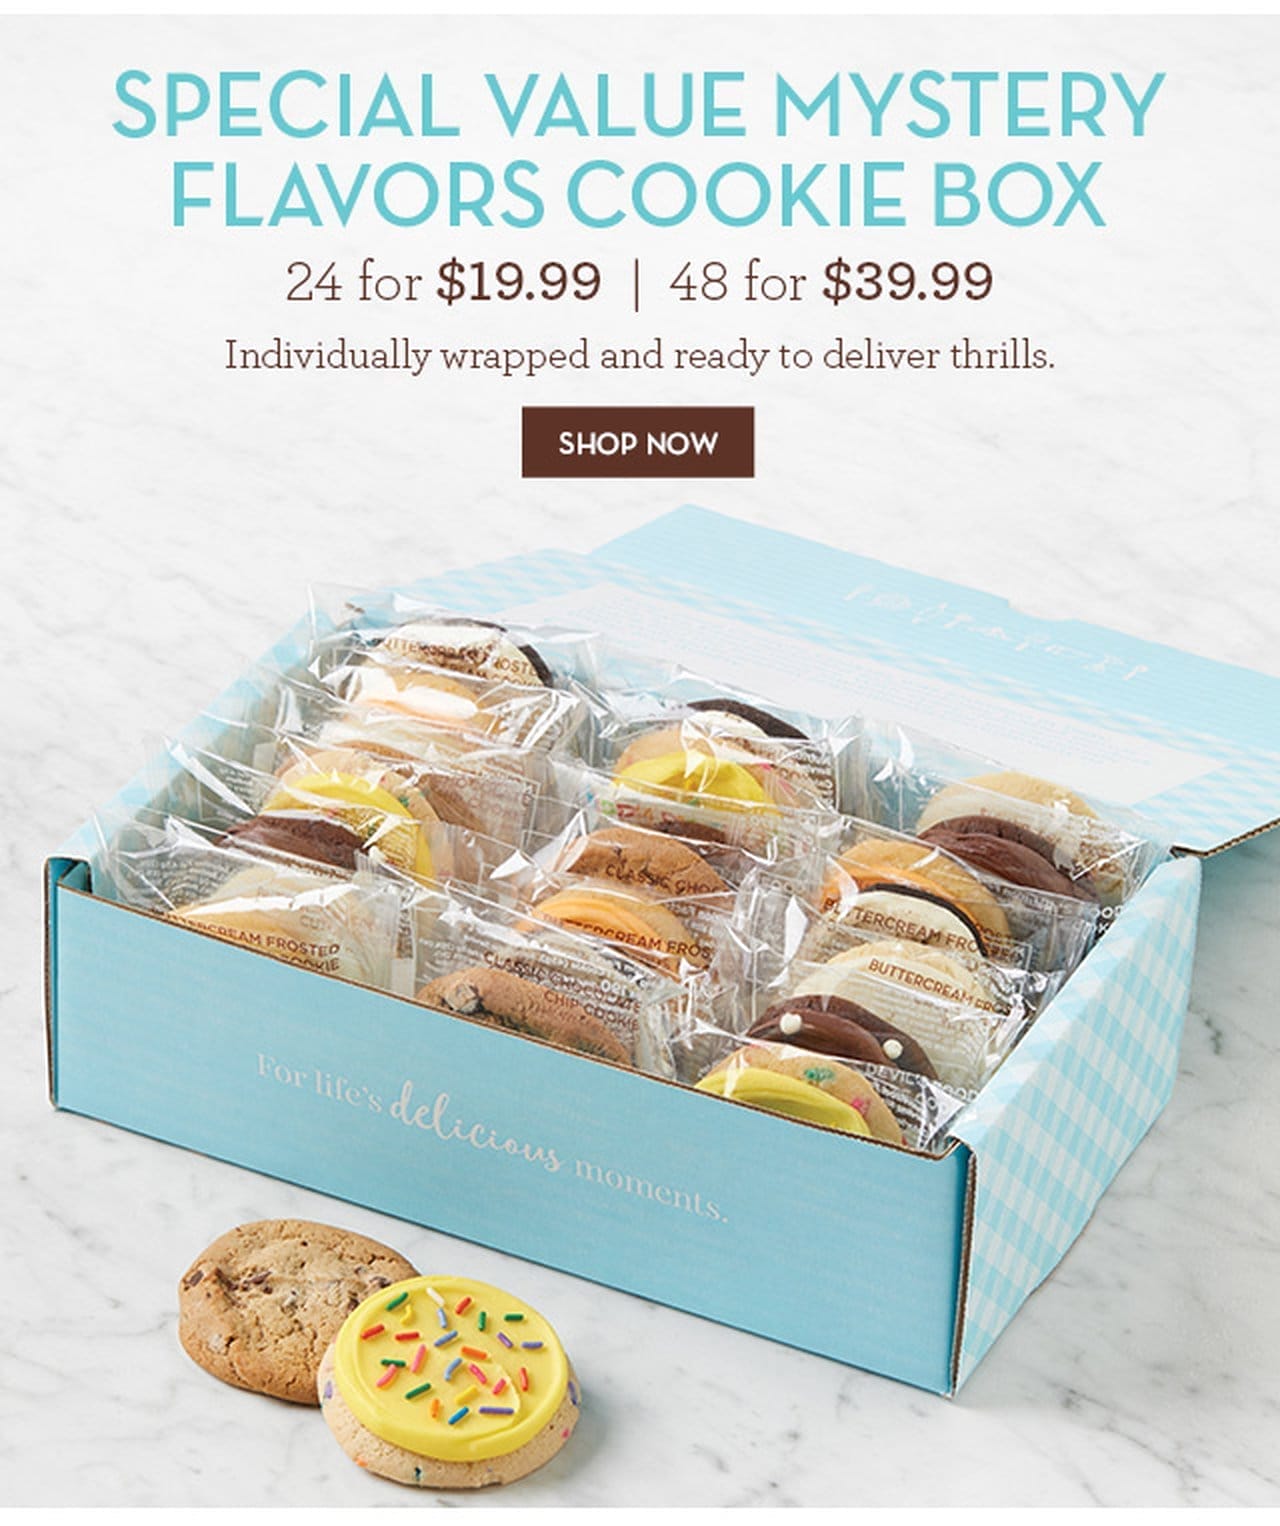 Special Value Mystery Flavors Cookie Box - 24 for \\$19.99 - 48 for \\$39.99 - Individually wrapped and ready to deliver thrills.